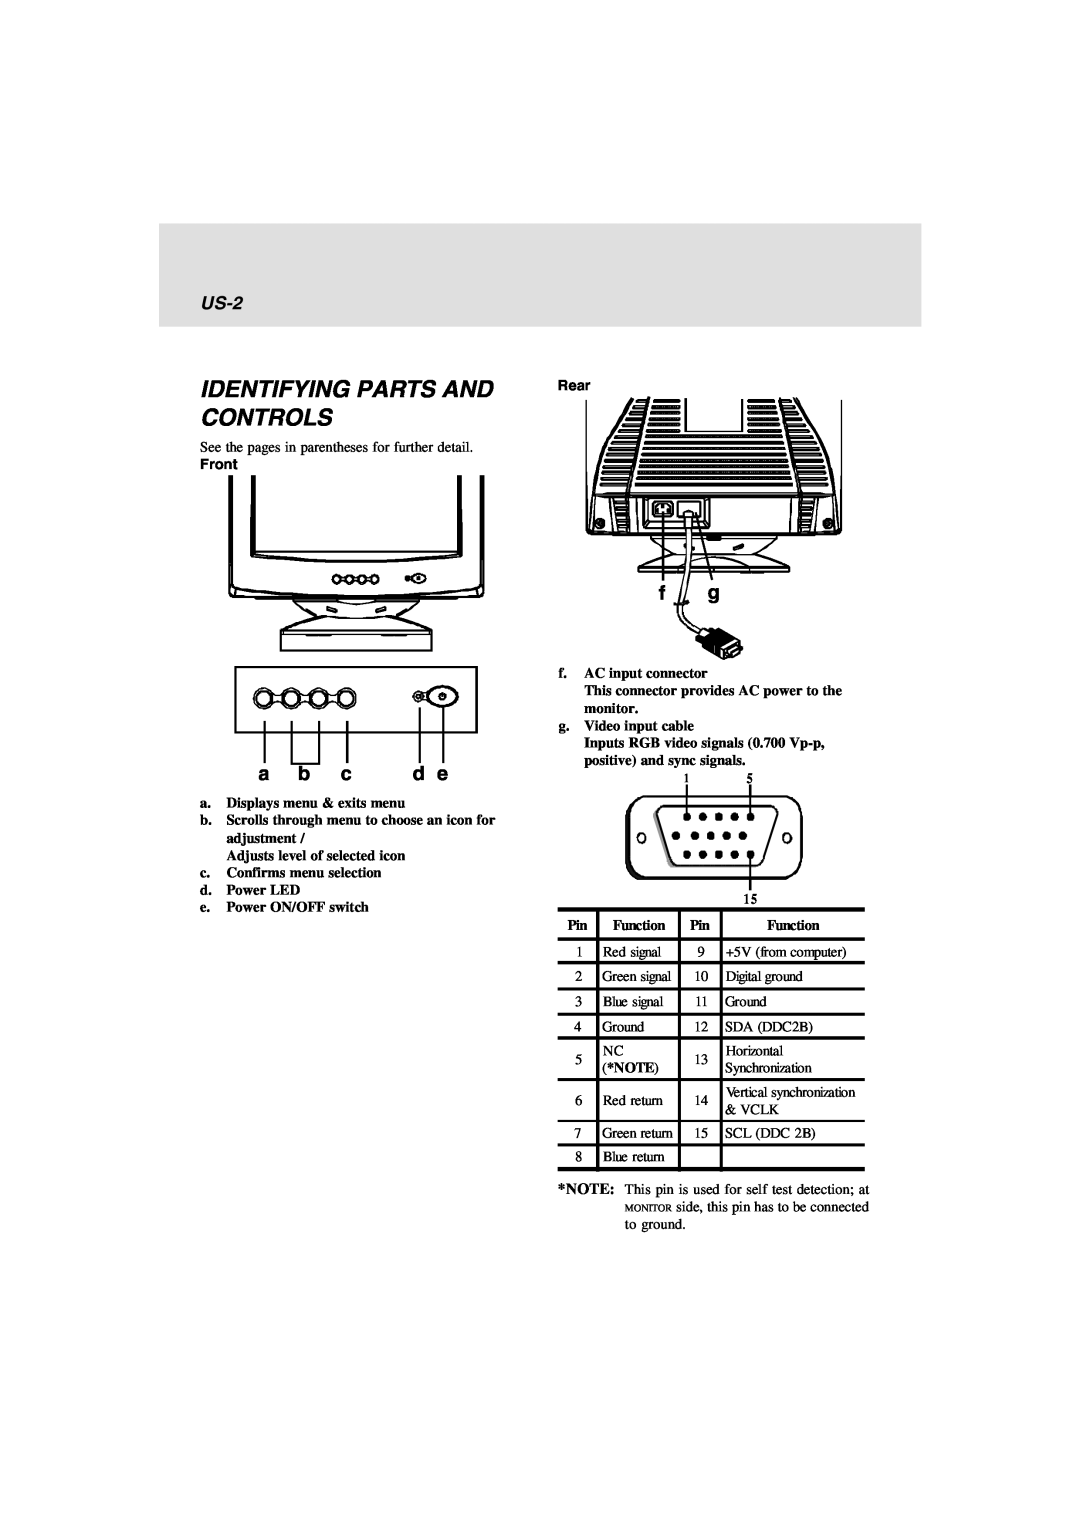 Lenovo E74 manual Identifying Parts And Controls, US-2, a b c, Rear, Front 